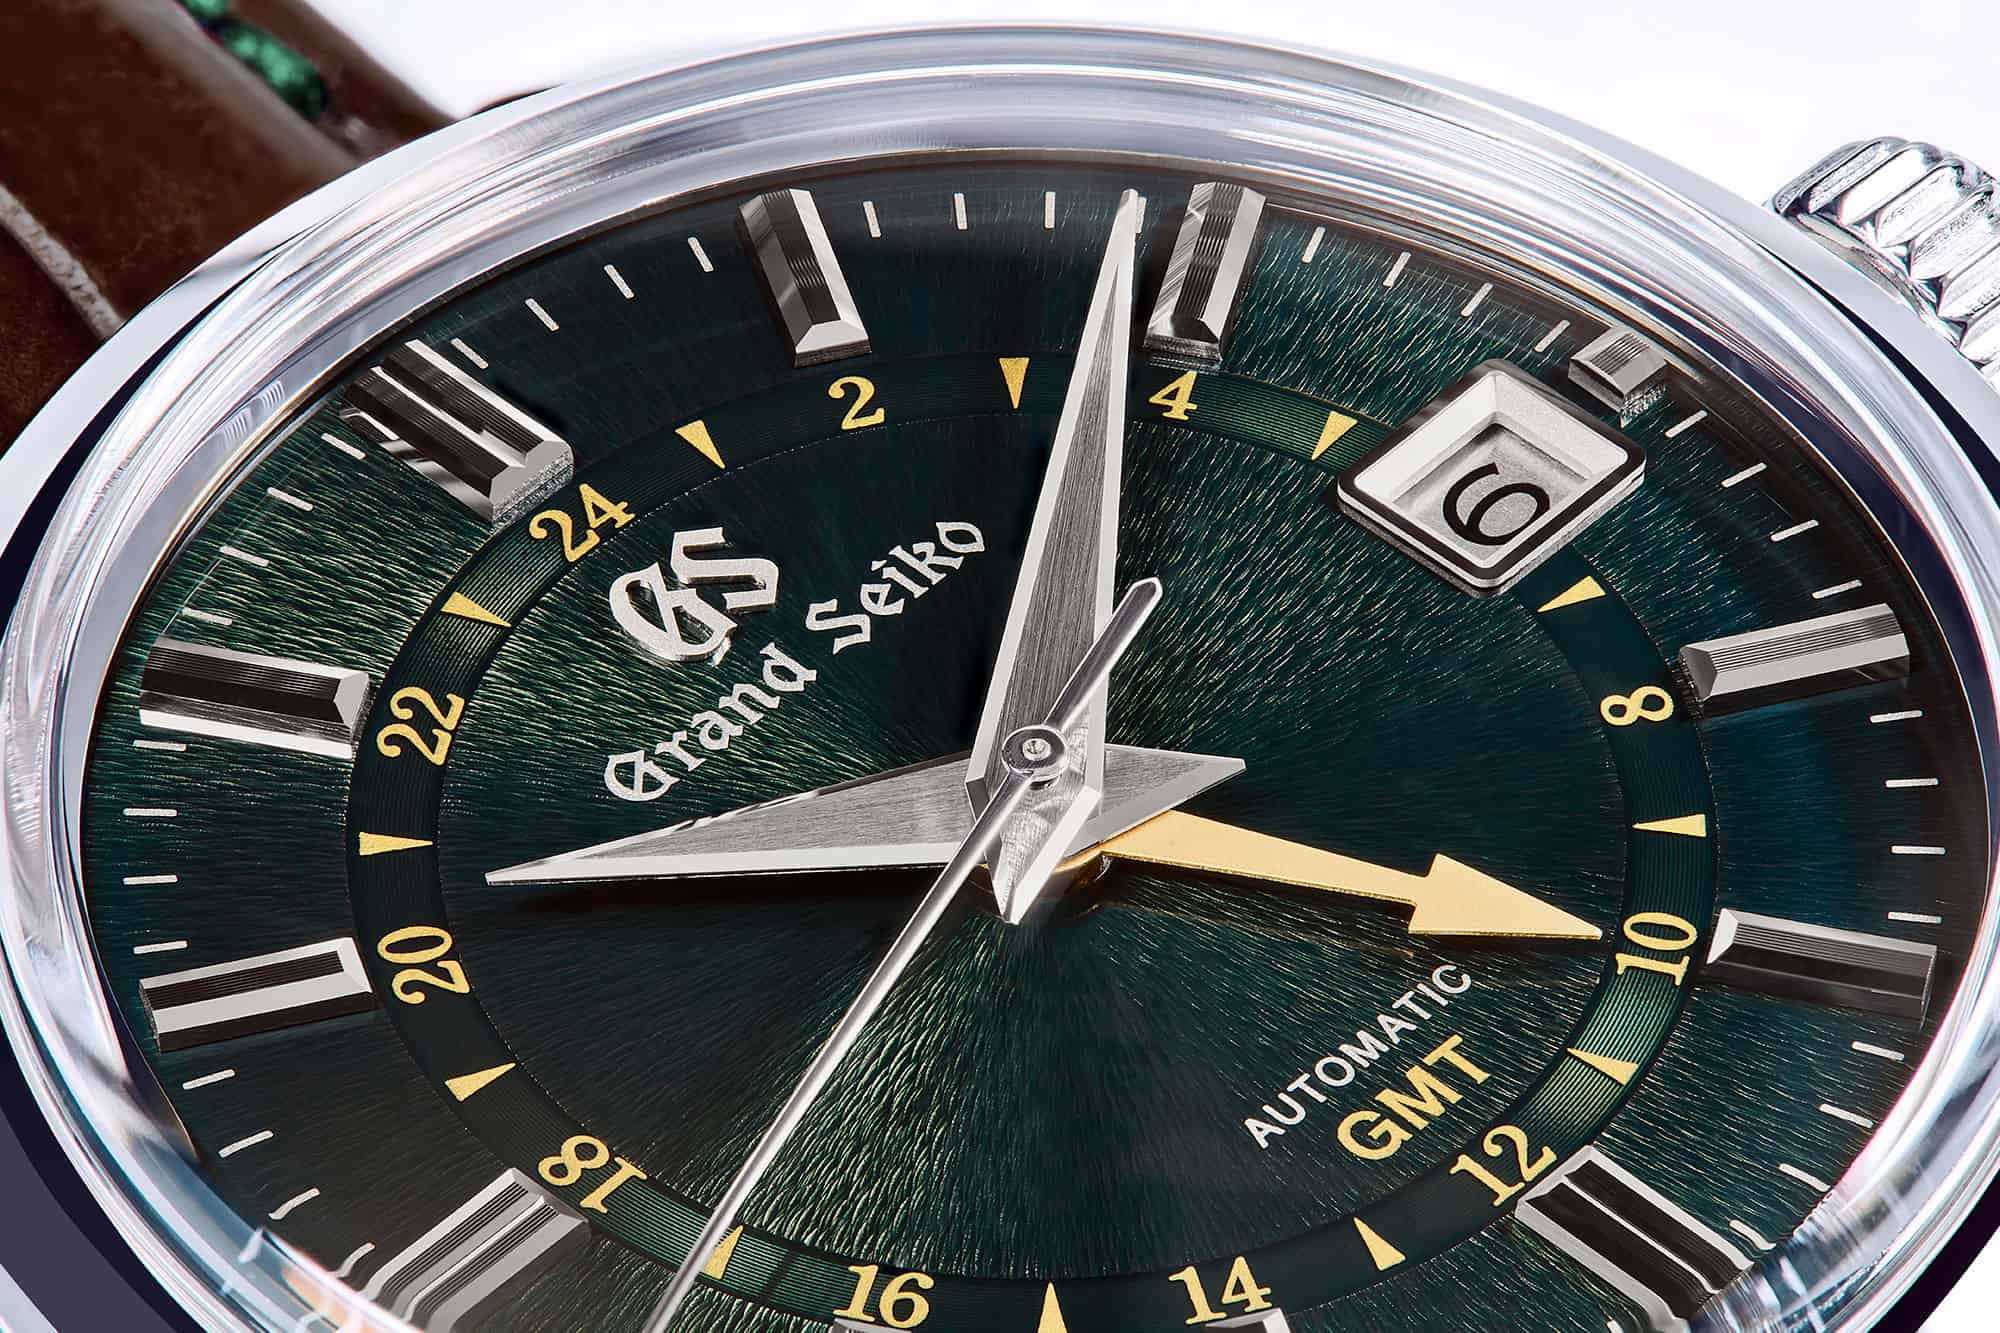 Grand Seiko teams with Watches of Switzerland for their Latest Mt. Iwate  Dialed GMT - Worn & Wound